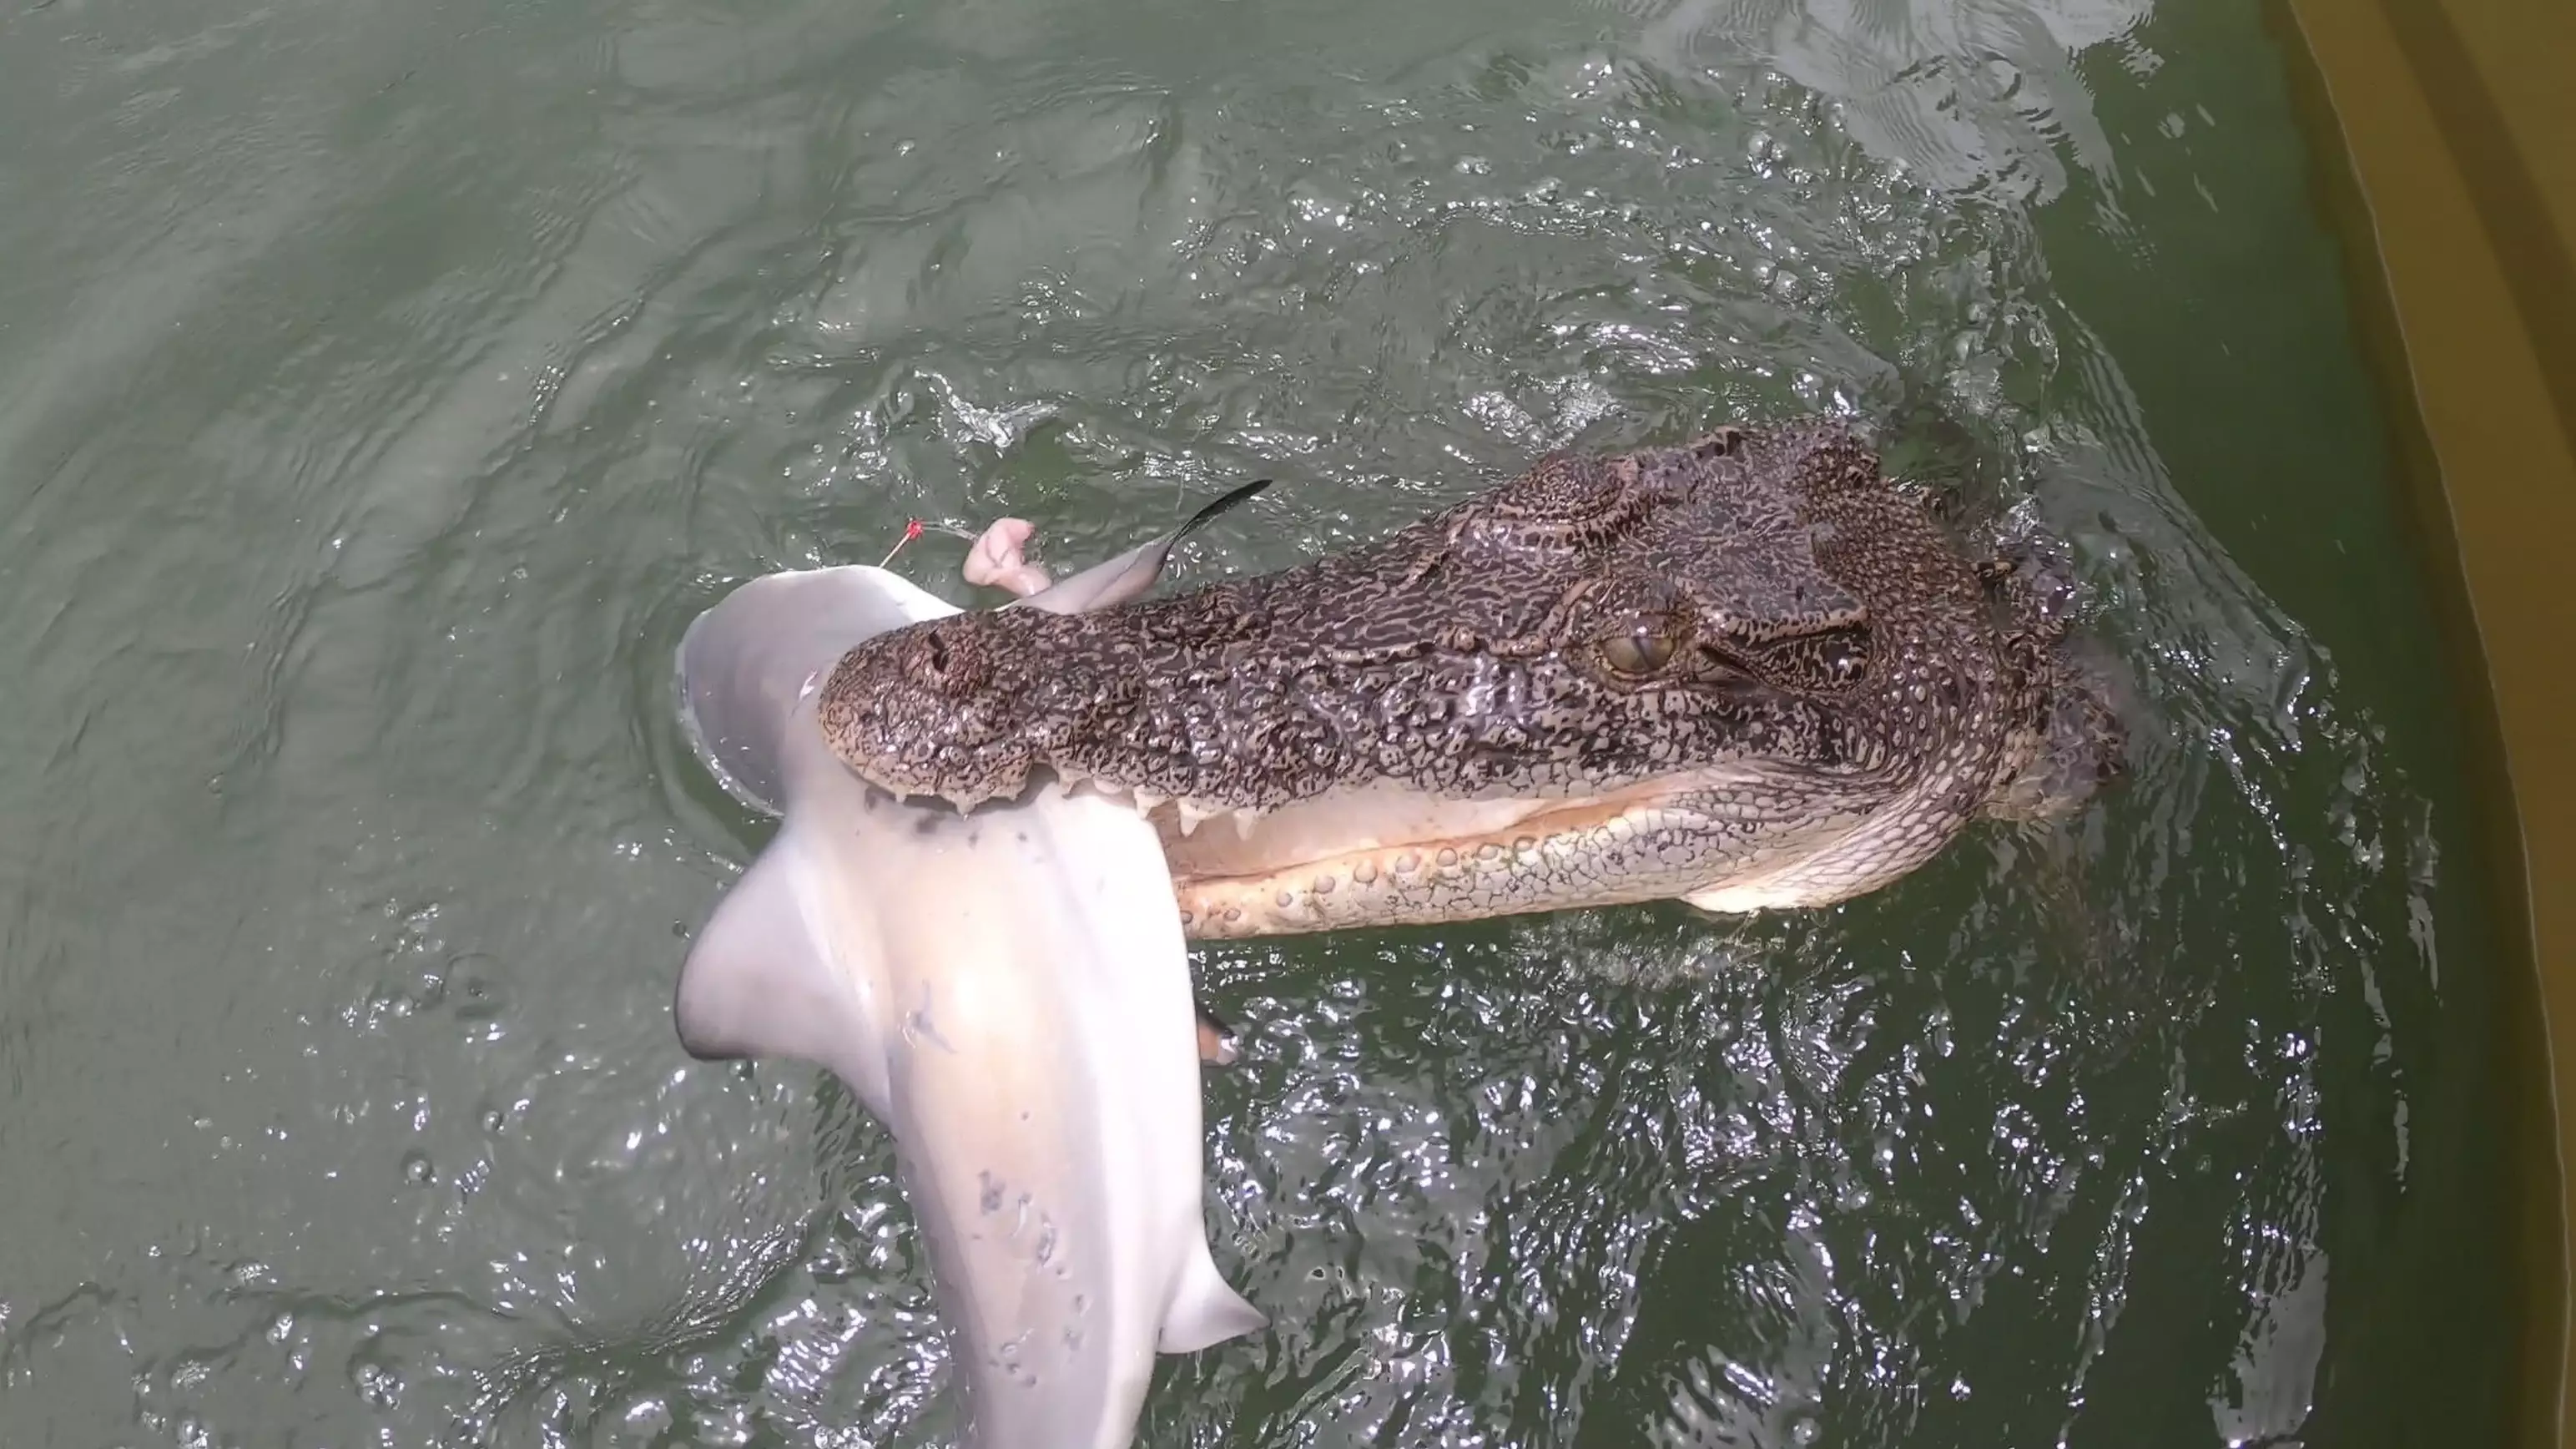 Fisherman Catches Shark But Then Loses It To Crocodile